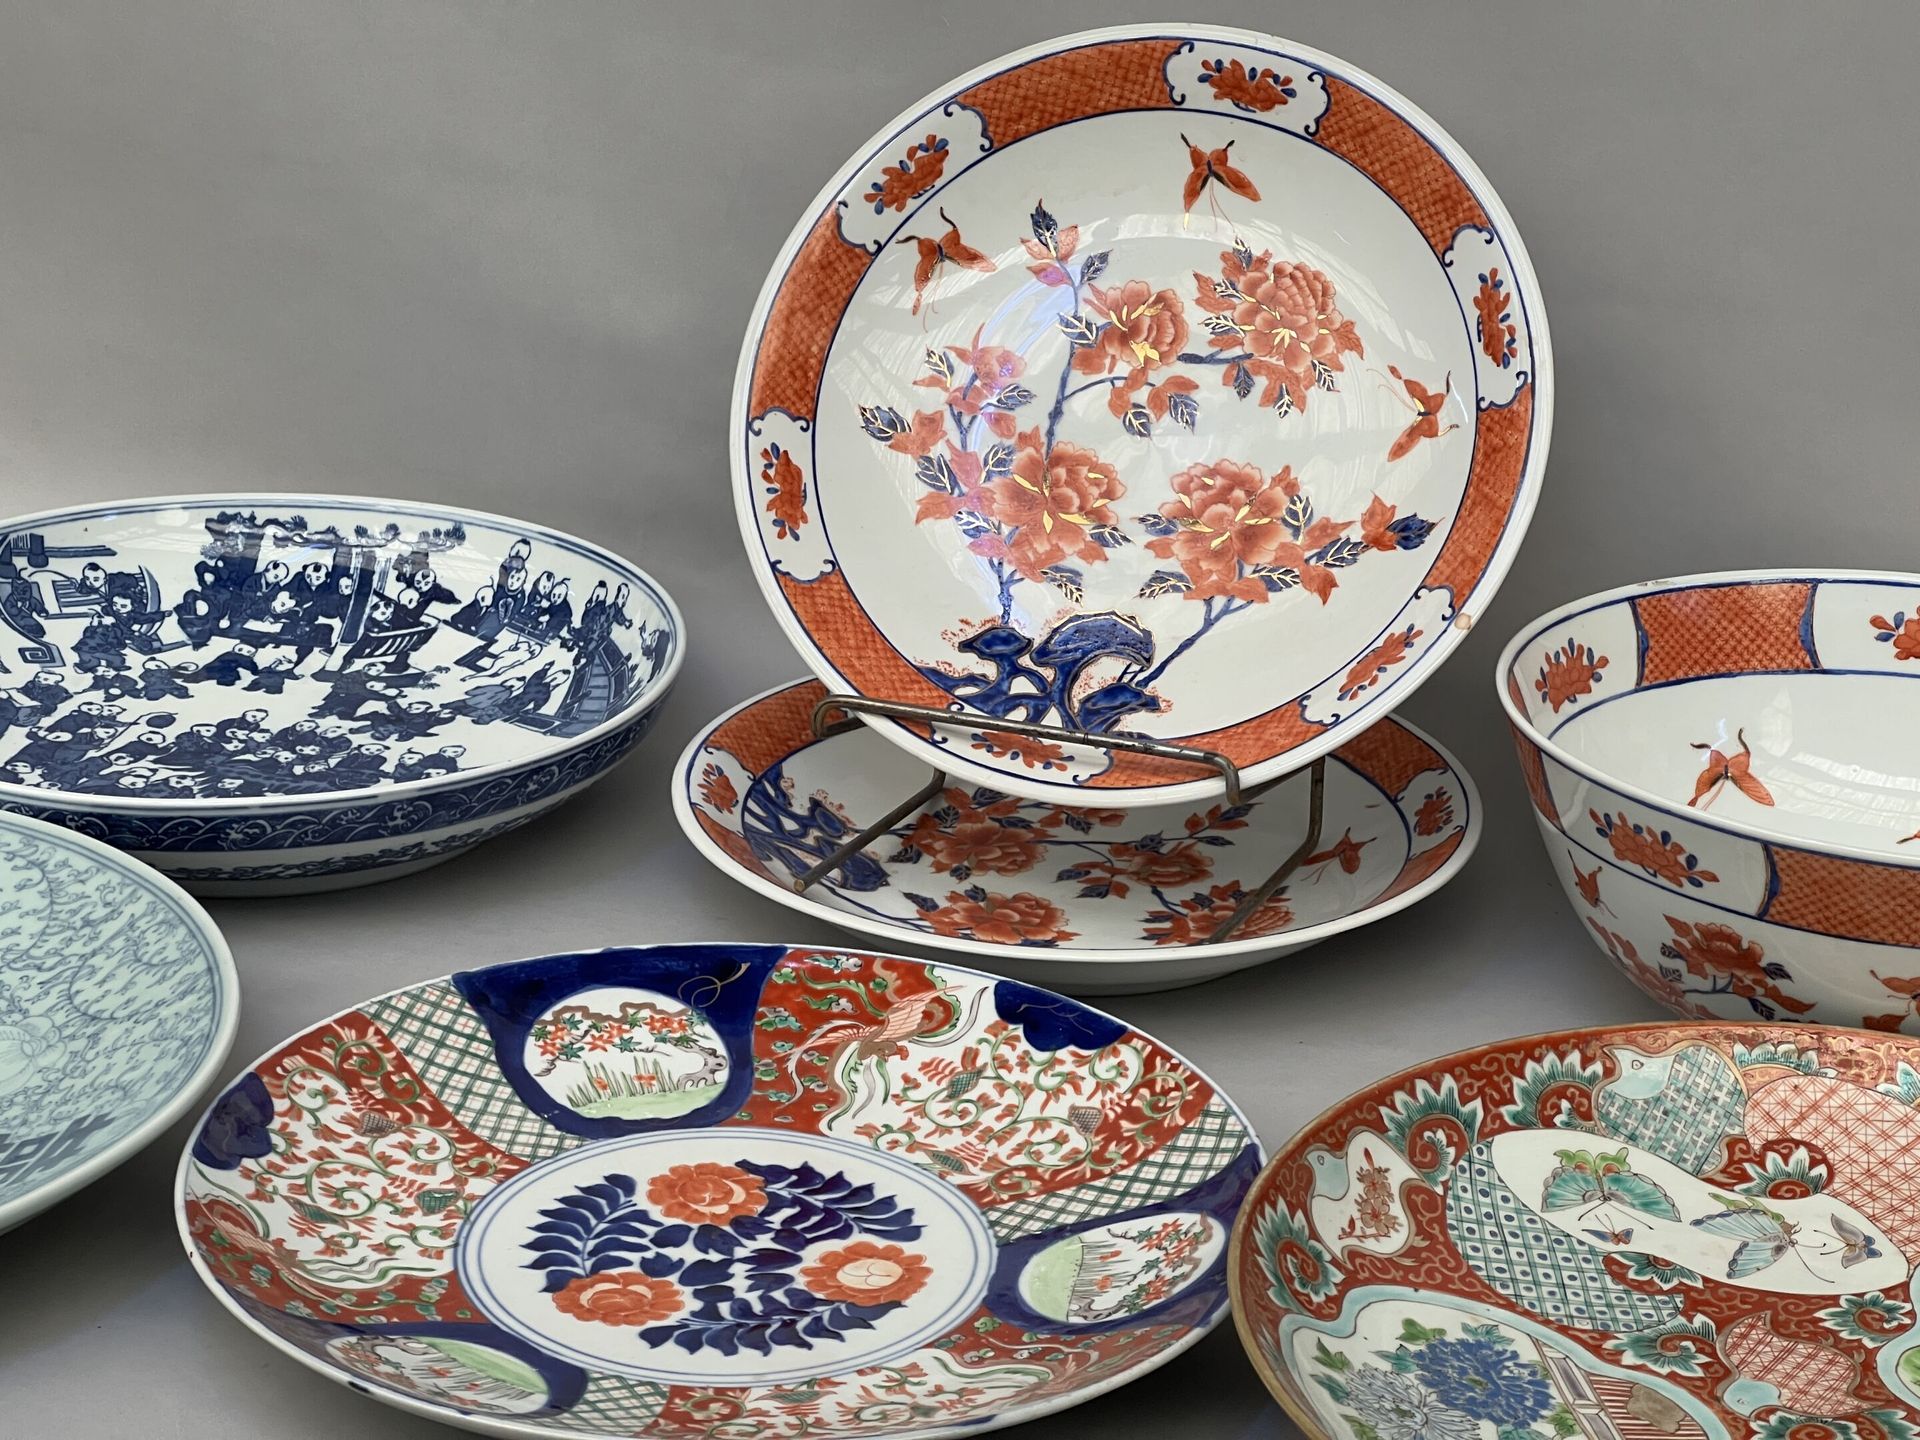 Null CHINA - 20th century

Set in polychrome porcelain including :

- two round &hellip;